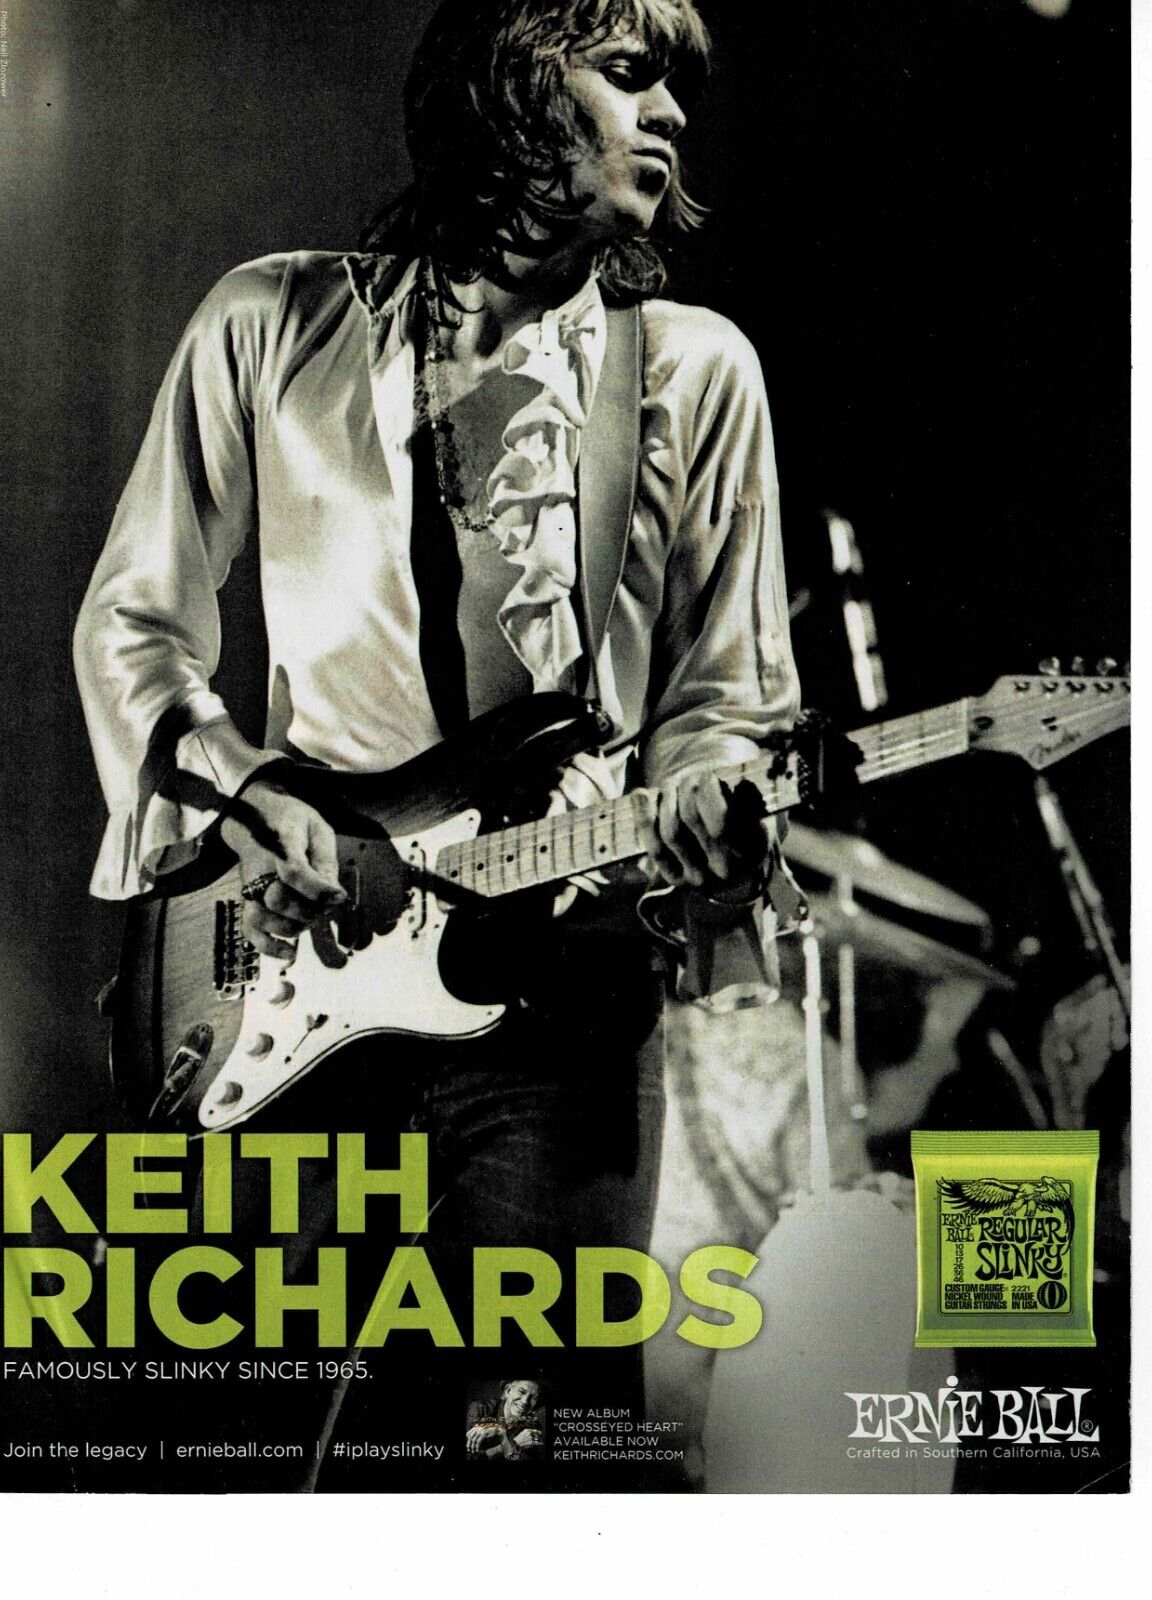 KEITH RICHARDS of THE ROLLING STONES - Ernie Ball - 2015 Print Advertisement